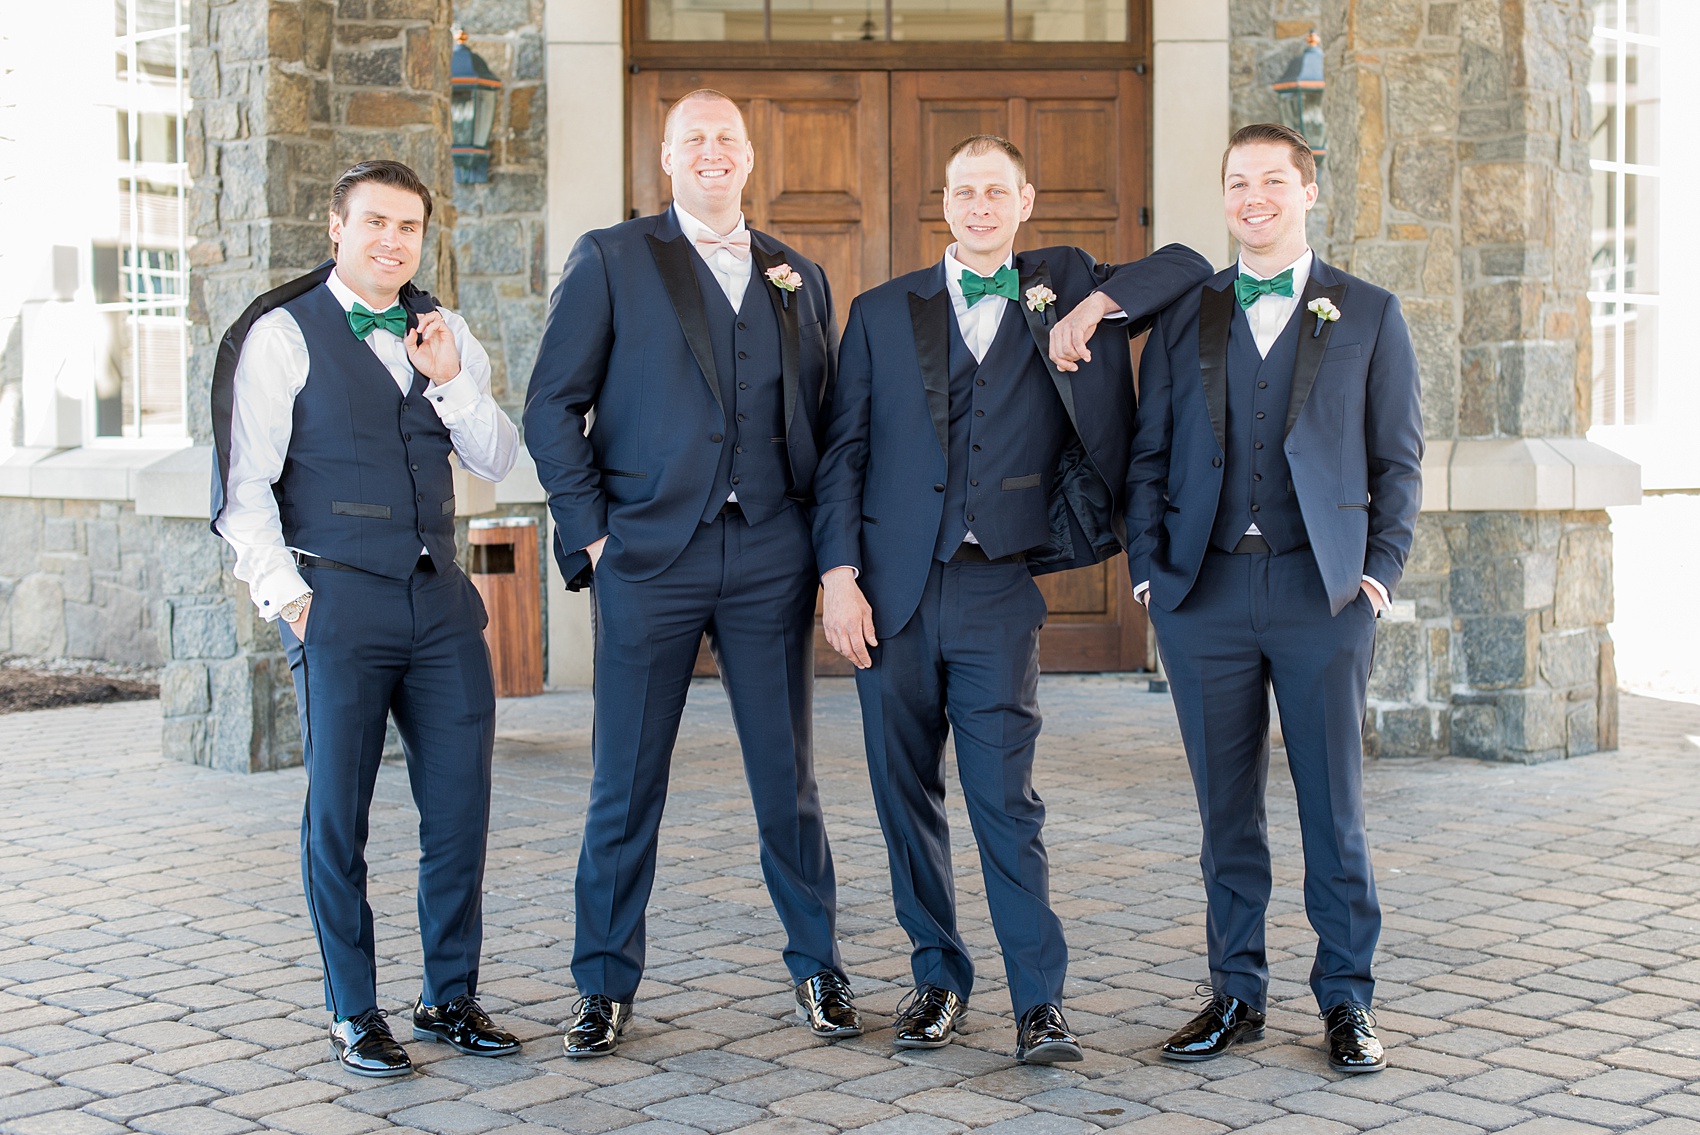 Saratoga Springs destination wedding photos by Mikkel Paige Photography. This picture shows the groom and groomsmen in navy blue tuxedos with black lapels, green bow ties (blush pink for the groom) and white spray rose boutonnieres tied with ribbon. The spring event was held at Saratoga National Golf Club venue. #SaratogaSpringsNY #SaratogaSprings #mikkelpaige #NYwedding #destinationwedding #navyblueandblacktuxedo